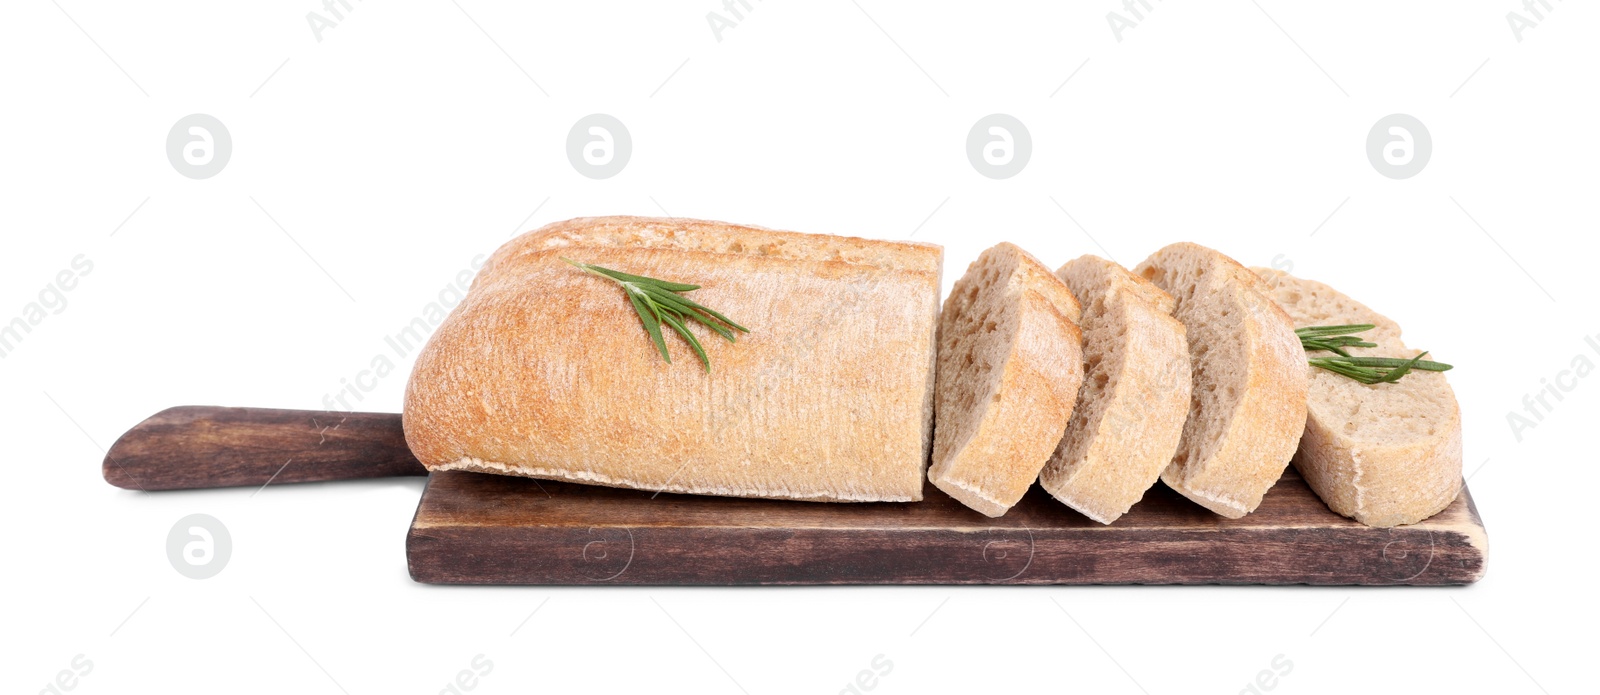 Photo of Cut delicious ciabatta with rosemary isolated on white